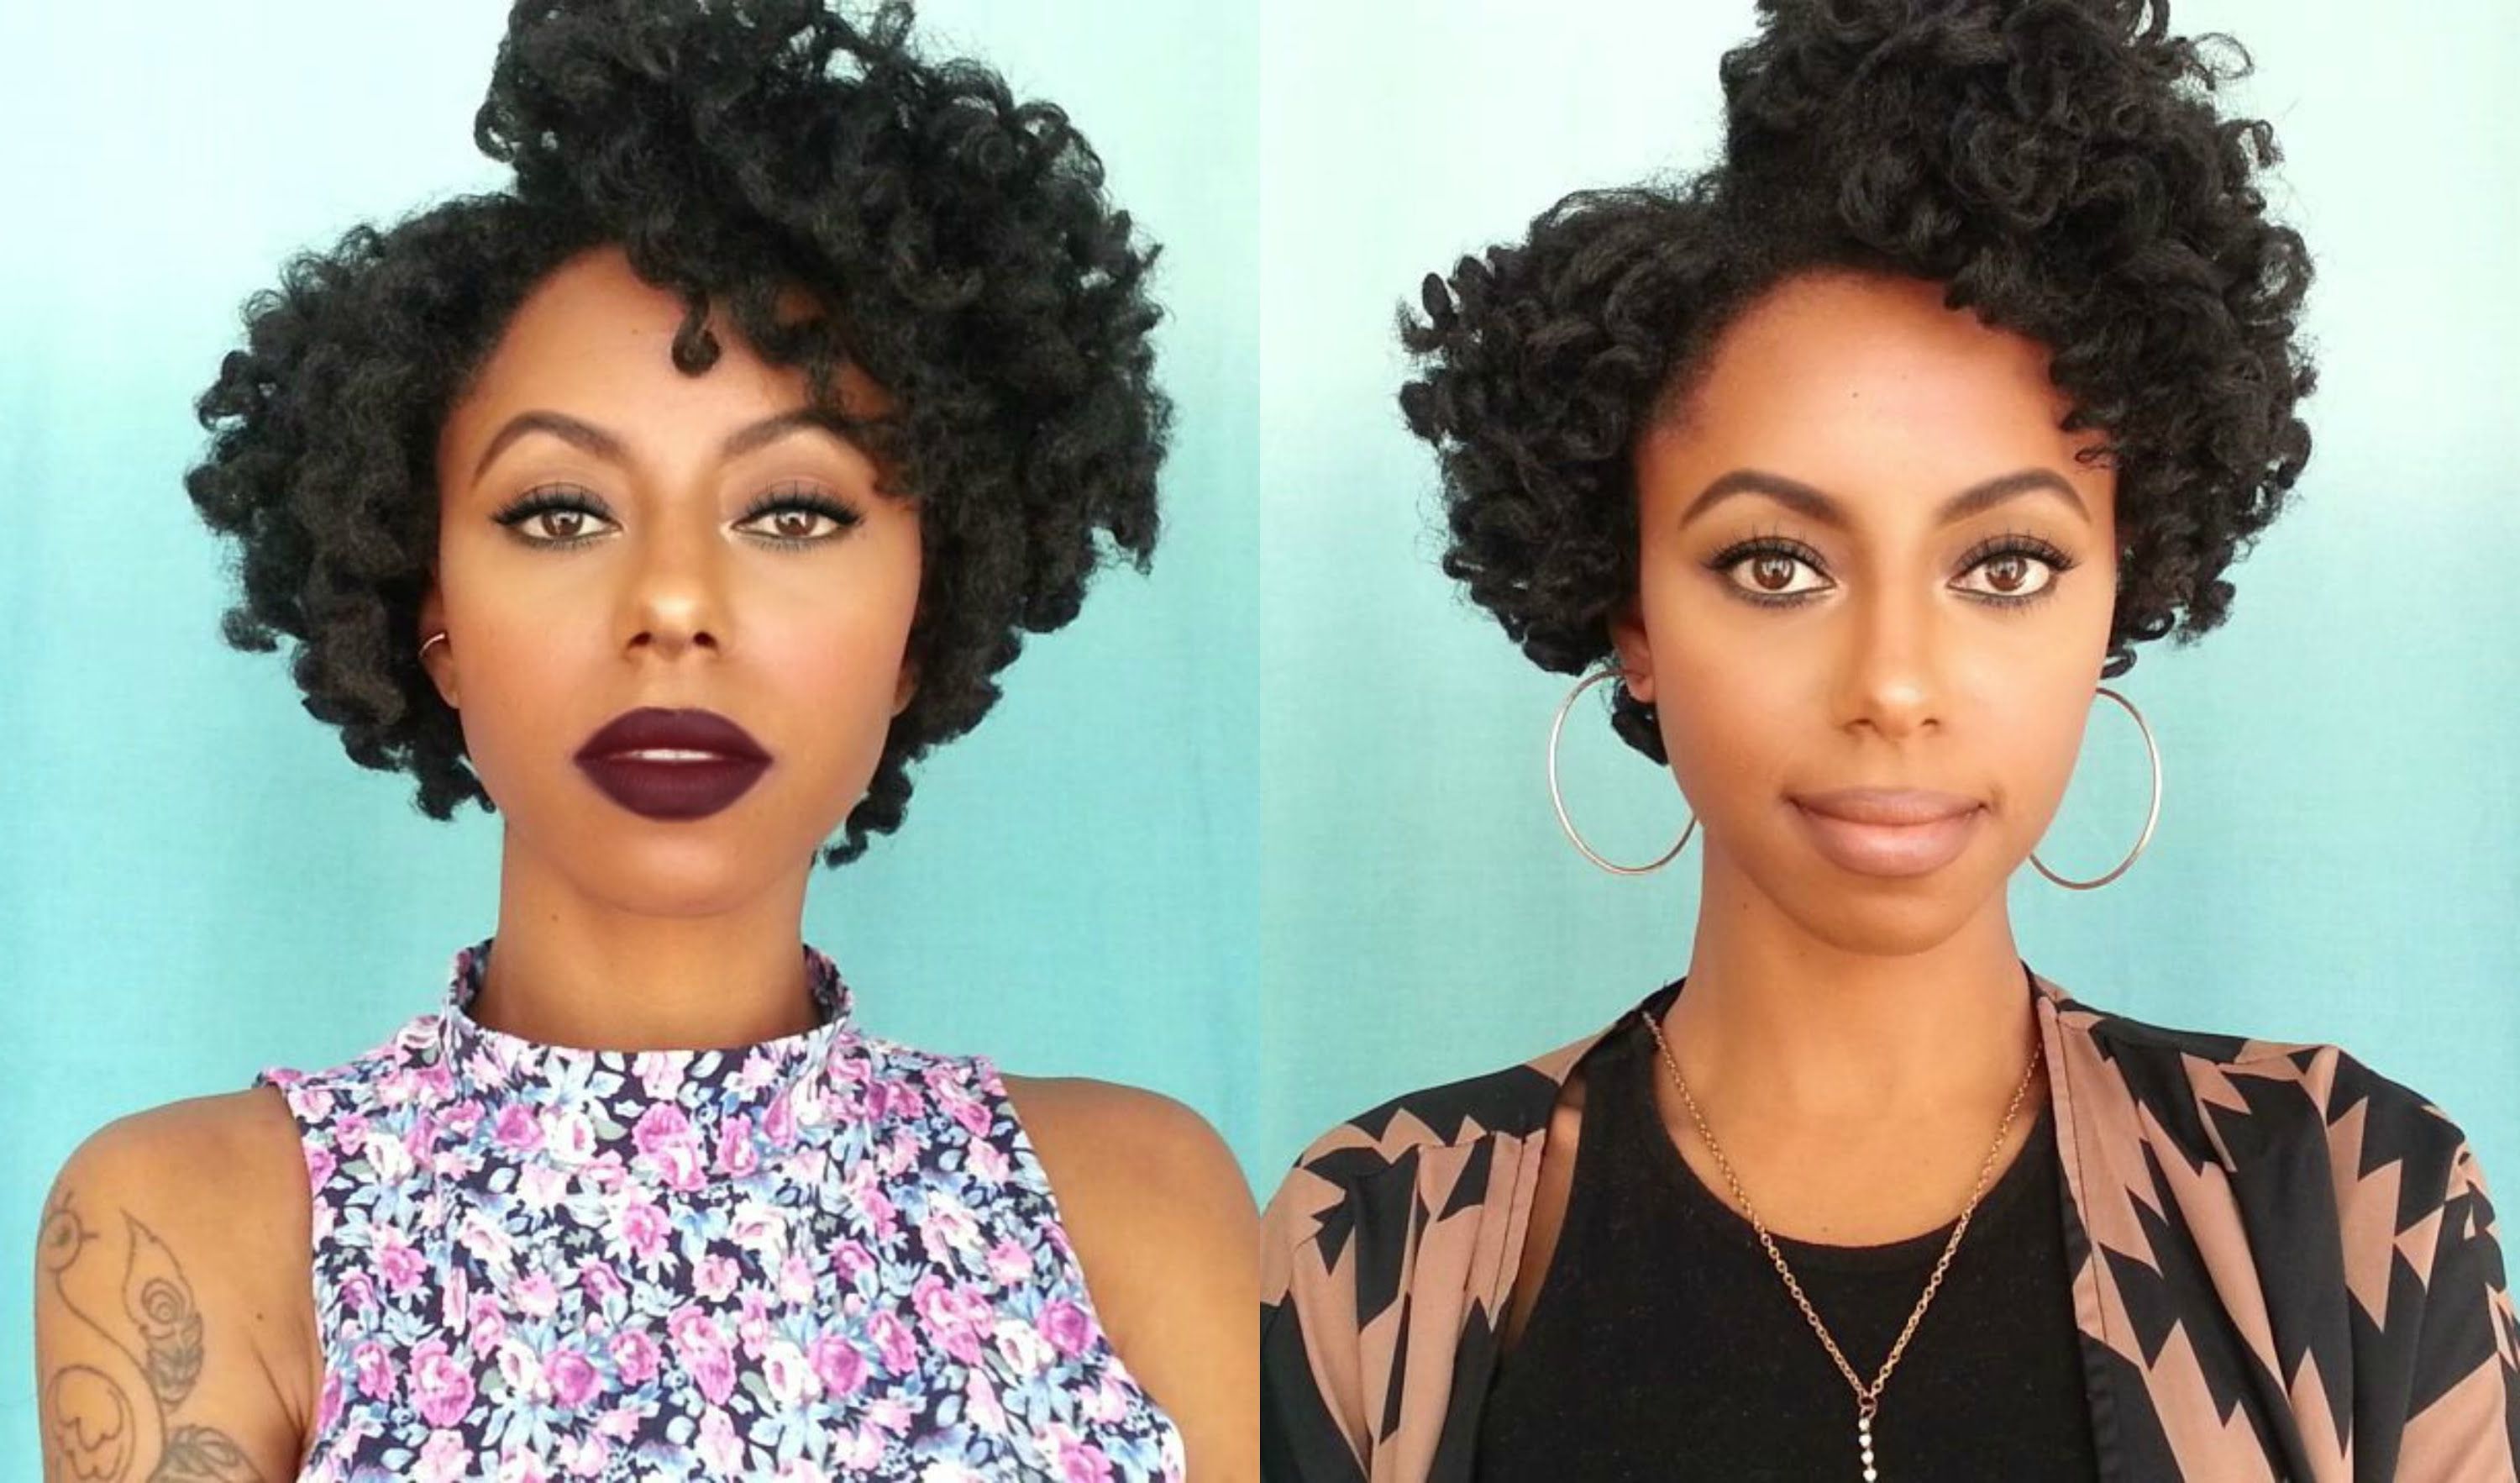 6 Of The Best Styles For Long Or Short 4b/4c Natural Hair — 2015 Throughout 4c Short Hairstyles (View 14 of 25)